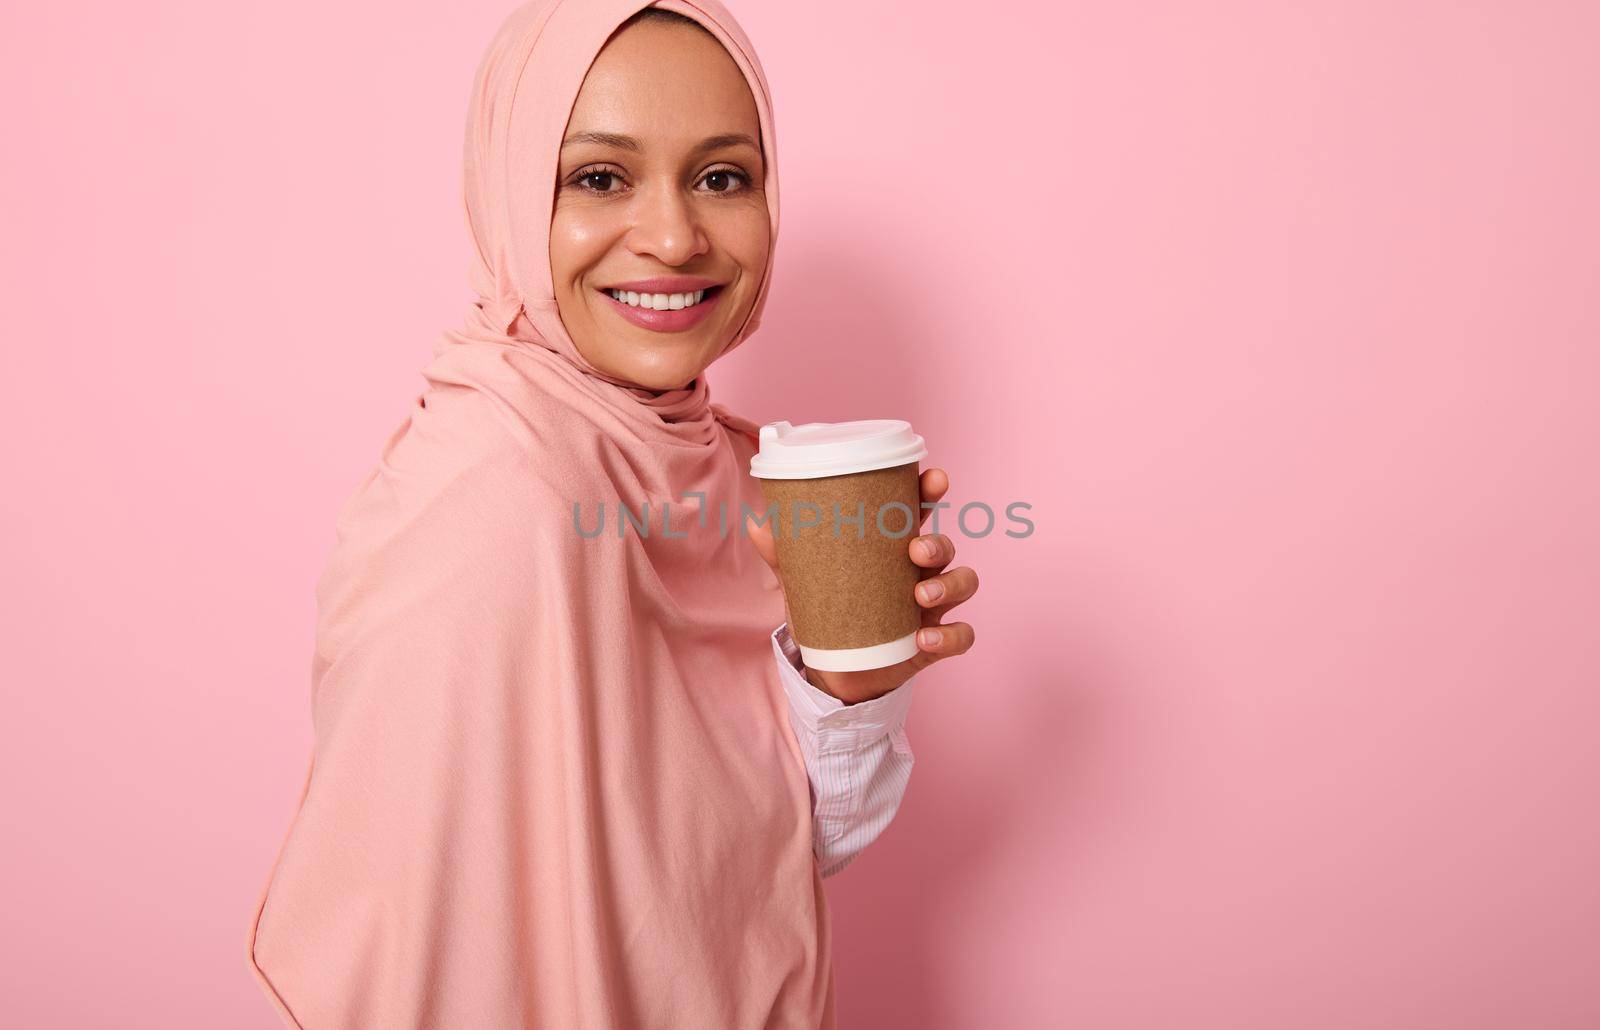 Close-up. Arabic Muslim woman with covered head in hijab holds disposable cardboard takeaway cup, smiles toothy smile, looking at camera, standing three quarters against colored background, copy space by artgf